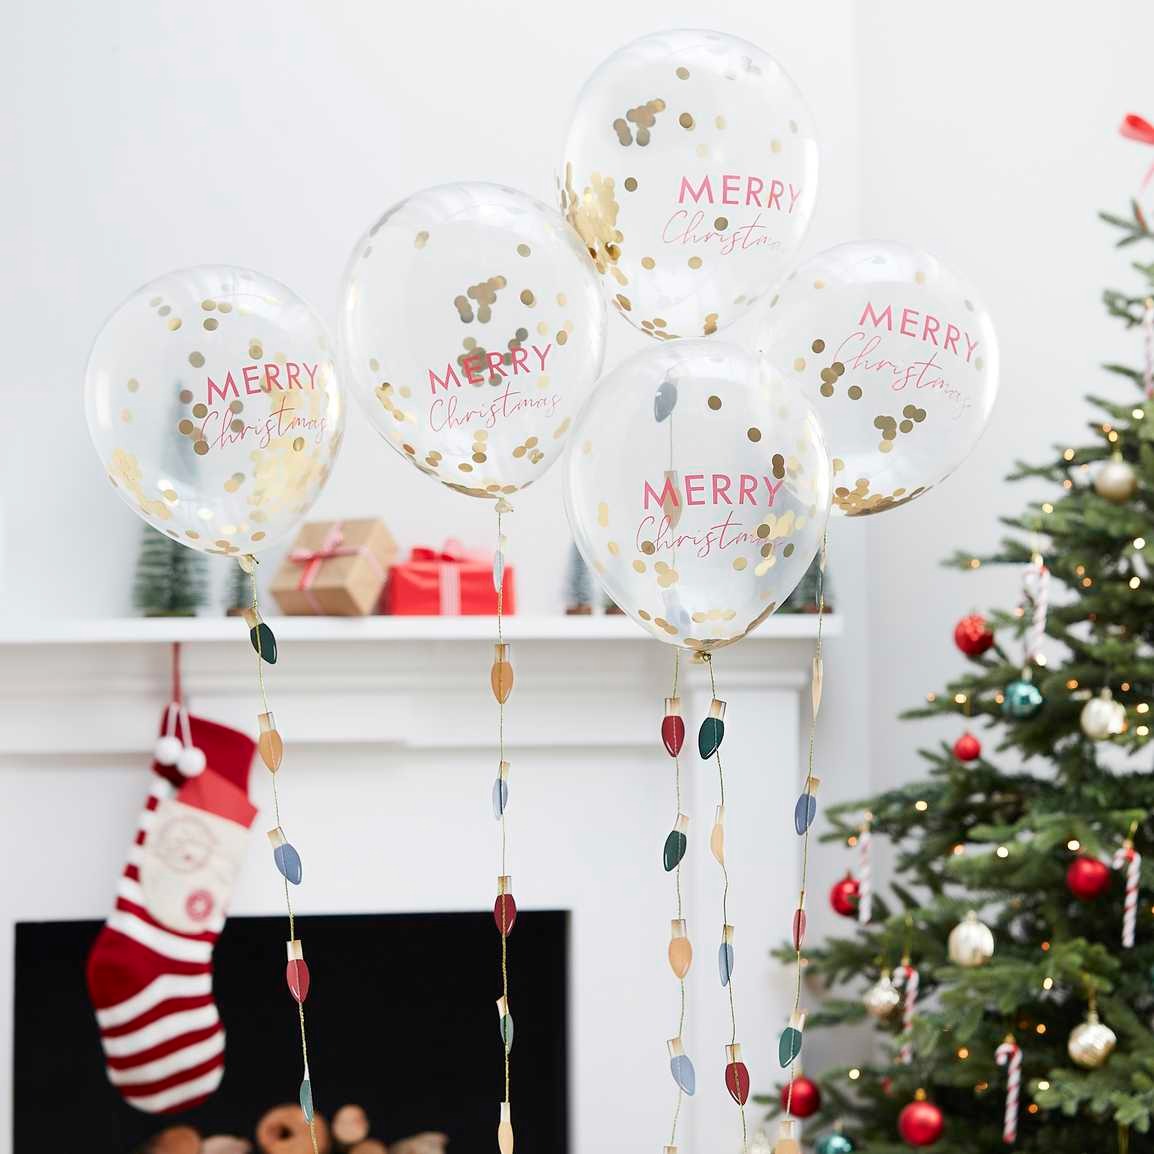 Latex confetti balloon Merry Christmas with colorful lights ribbon 5 pcs